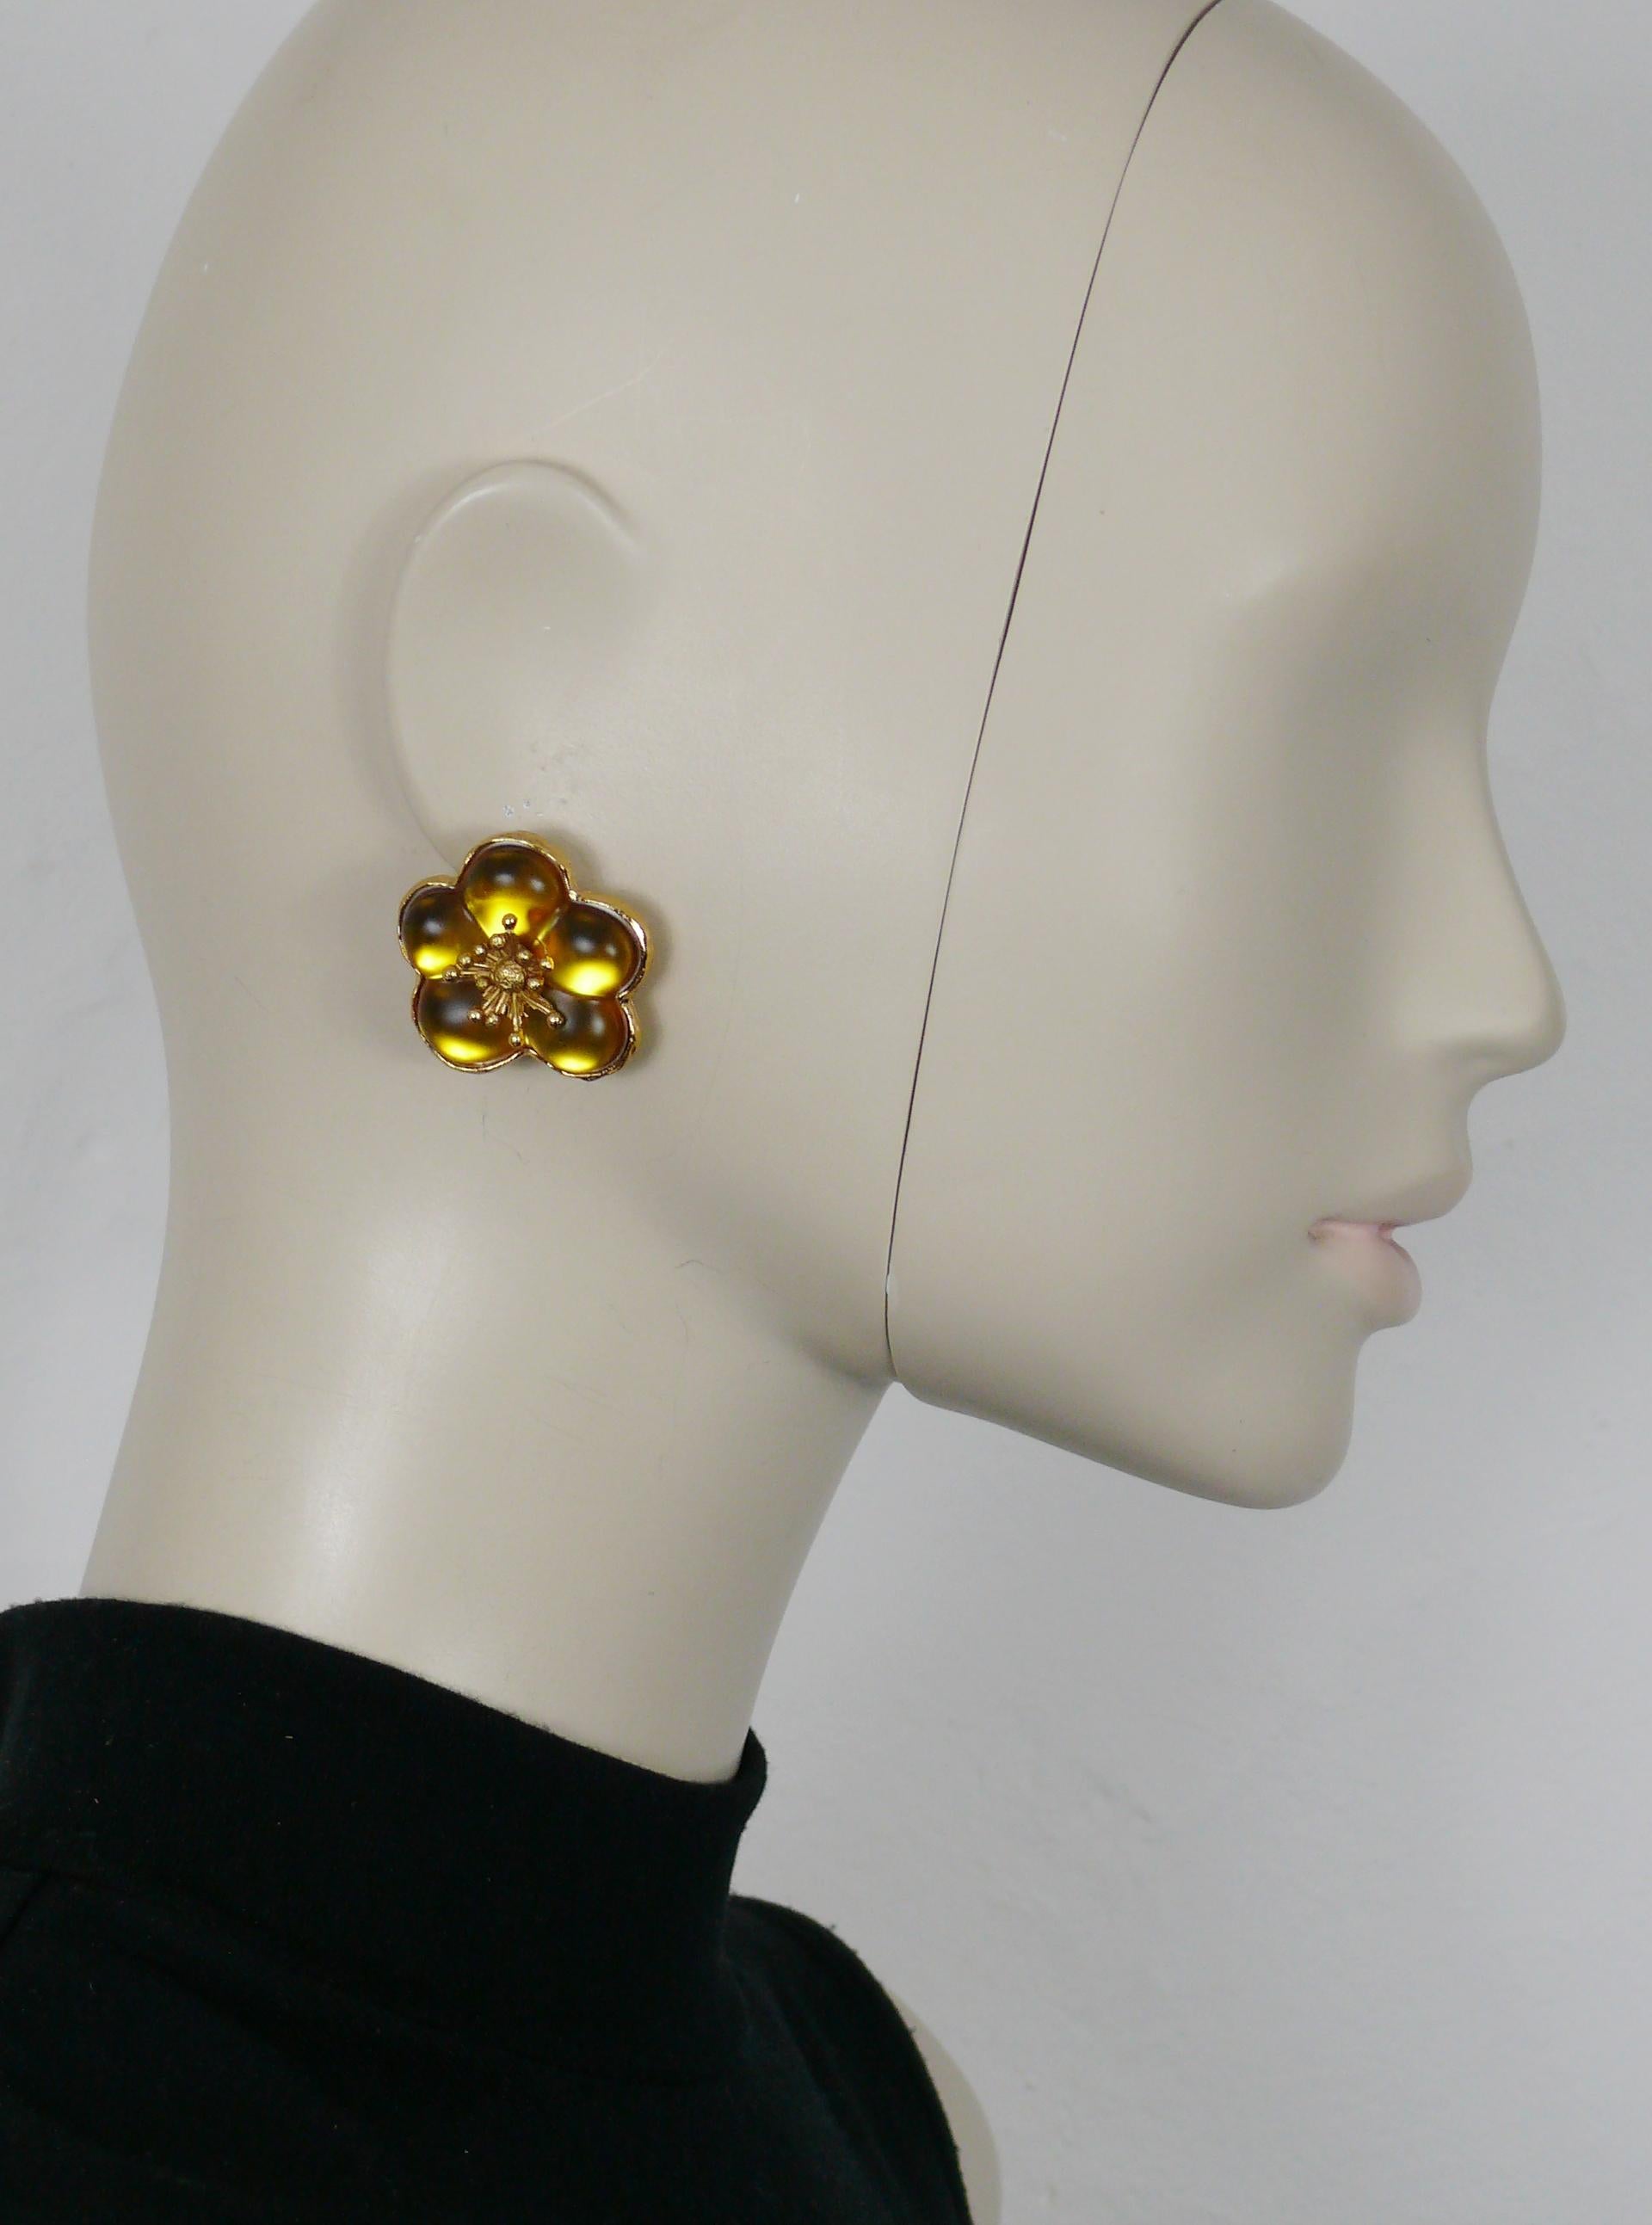 KENZO vintage gold tone clip-on earrings featuring a yellow resin flower.

Embossed KENZO Paris Made in France.

Indicative measurements : max. height approx. 3 cm (1.18 inches) / max. width approx. 3.1 cm (1.22 inches).

Weight per earring :